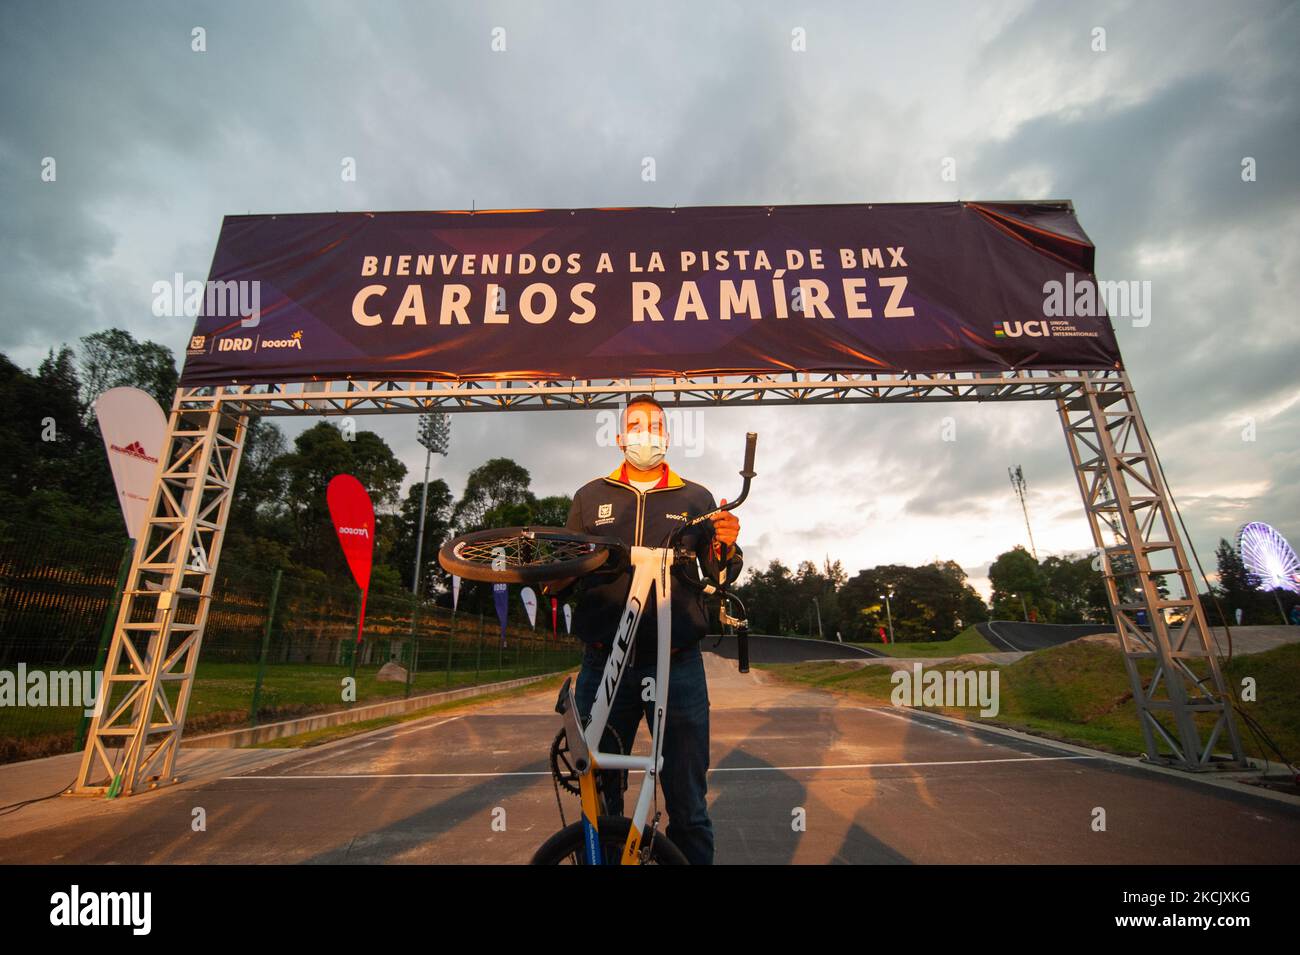 Carlos Ramirez poses for a photo with his bike at the finishline of the Carlos Ramirez BMX Track during the name inauguration of the Carlos Ramirez BMX track named after Carlos Ramirez bronze Olympic Medal winner during the Tokyo 2020+1 Olympics, in Bogota, Colombia, on August 18, 2021. (Photo by Sebastian Barros/NurPhoto) Stock Photo